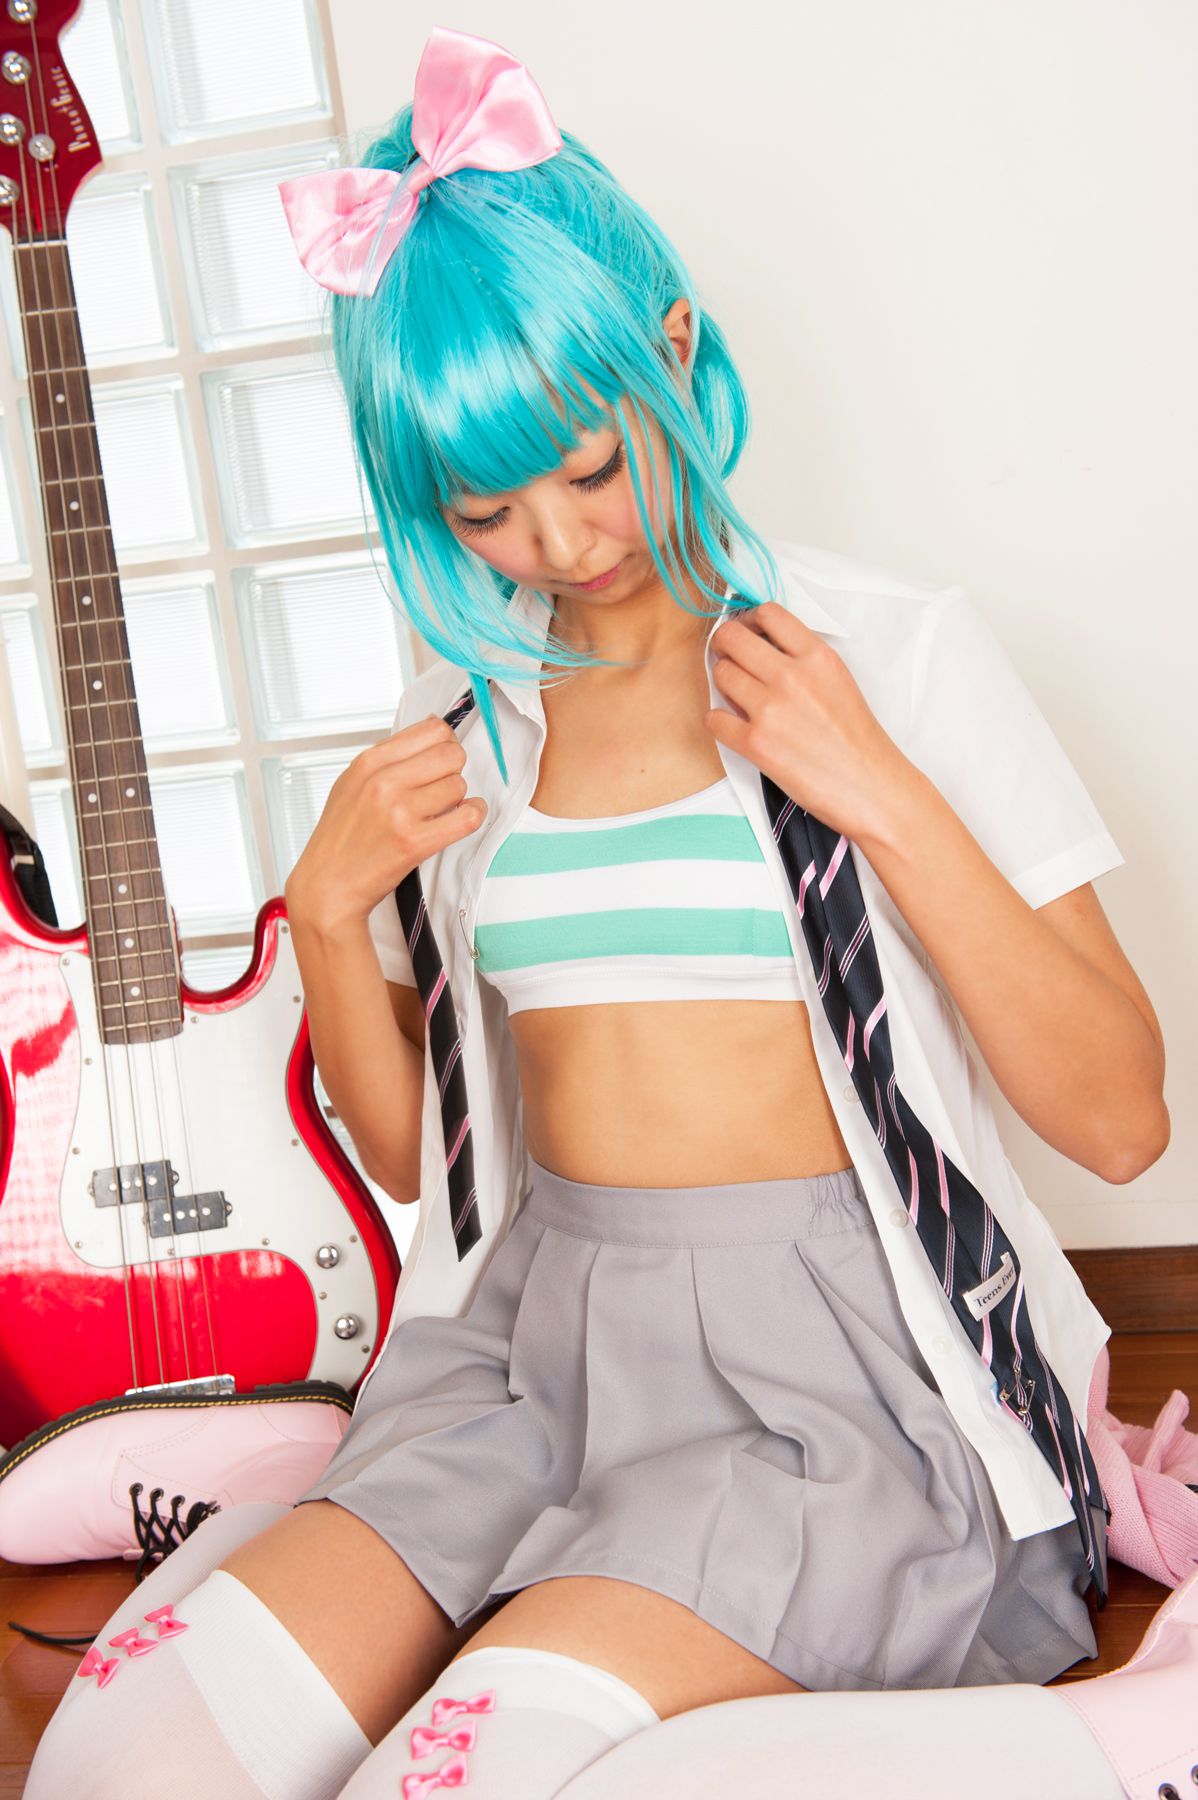 taotuhome[Cosplay] Necoco as Hatsune Miku from Vocaloid 套图第141张